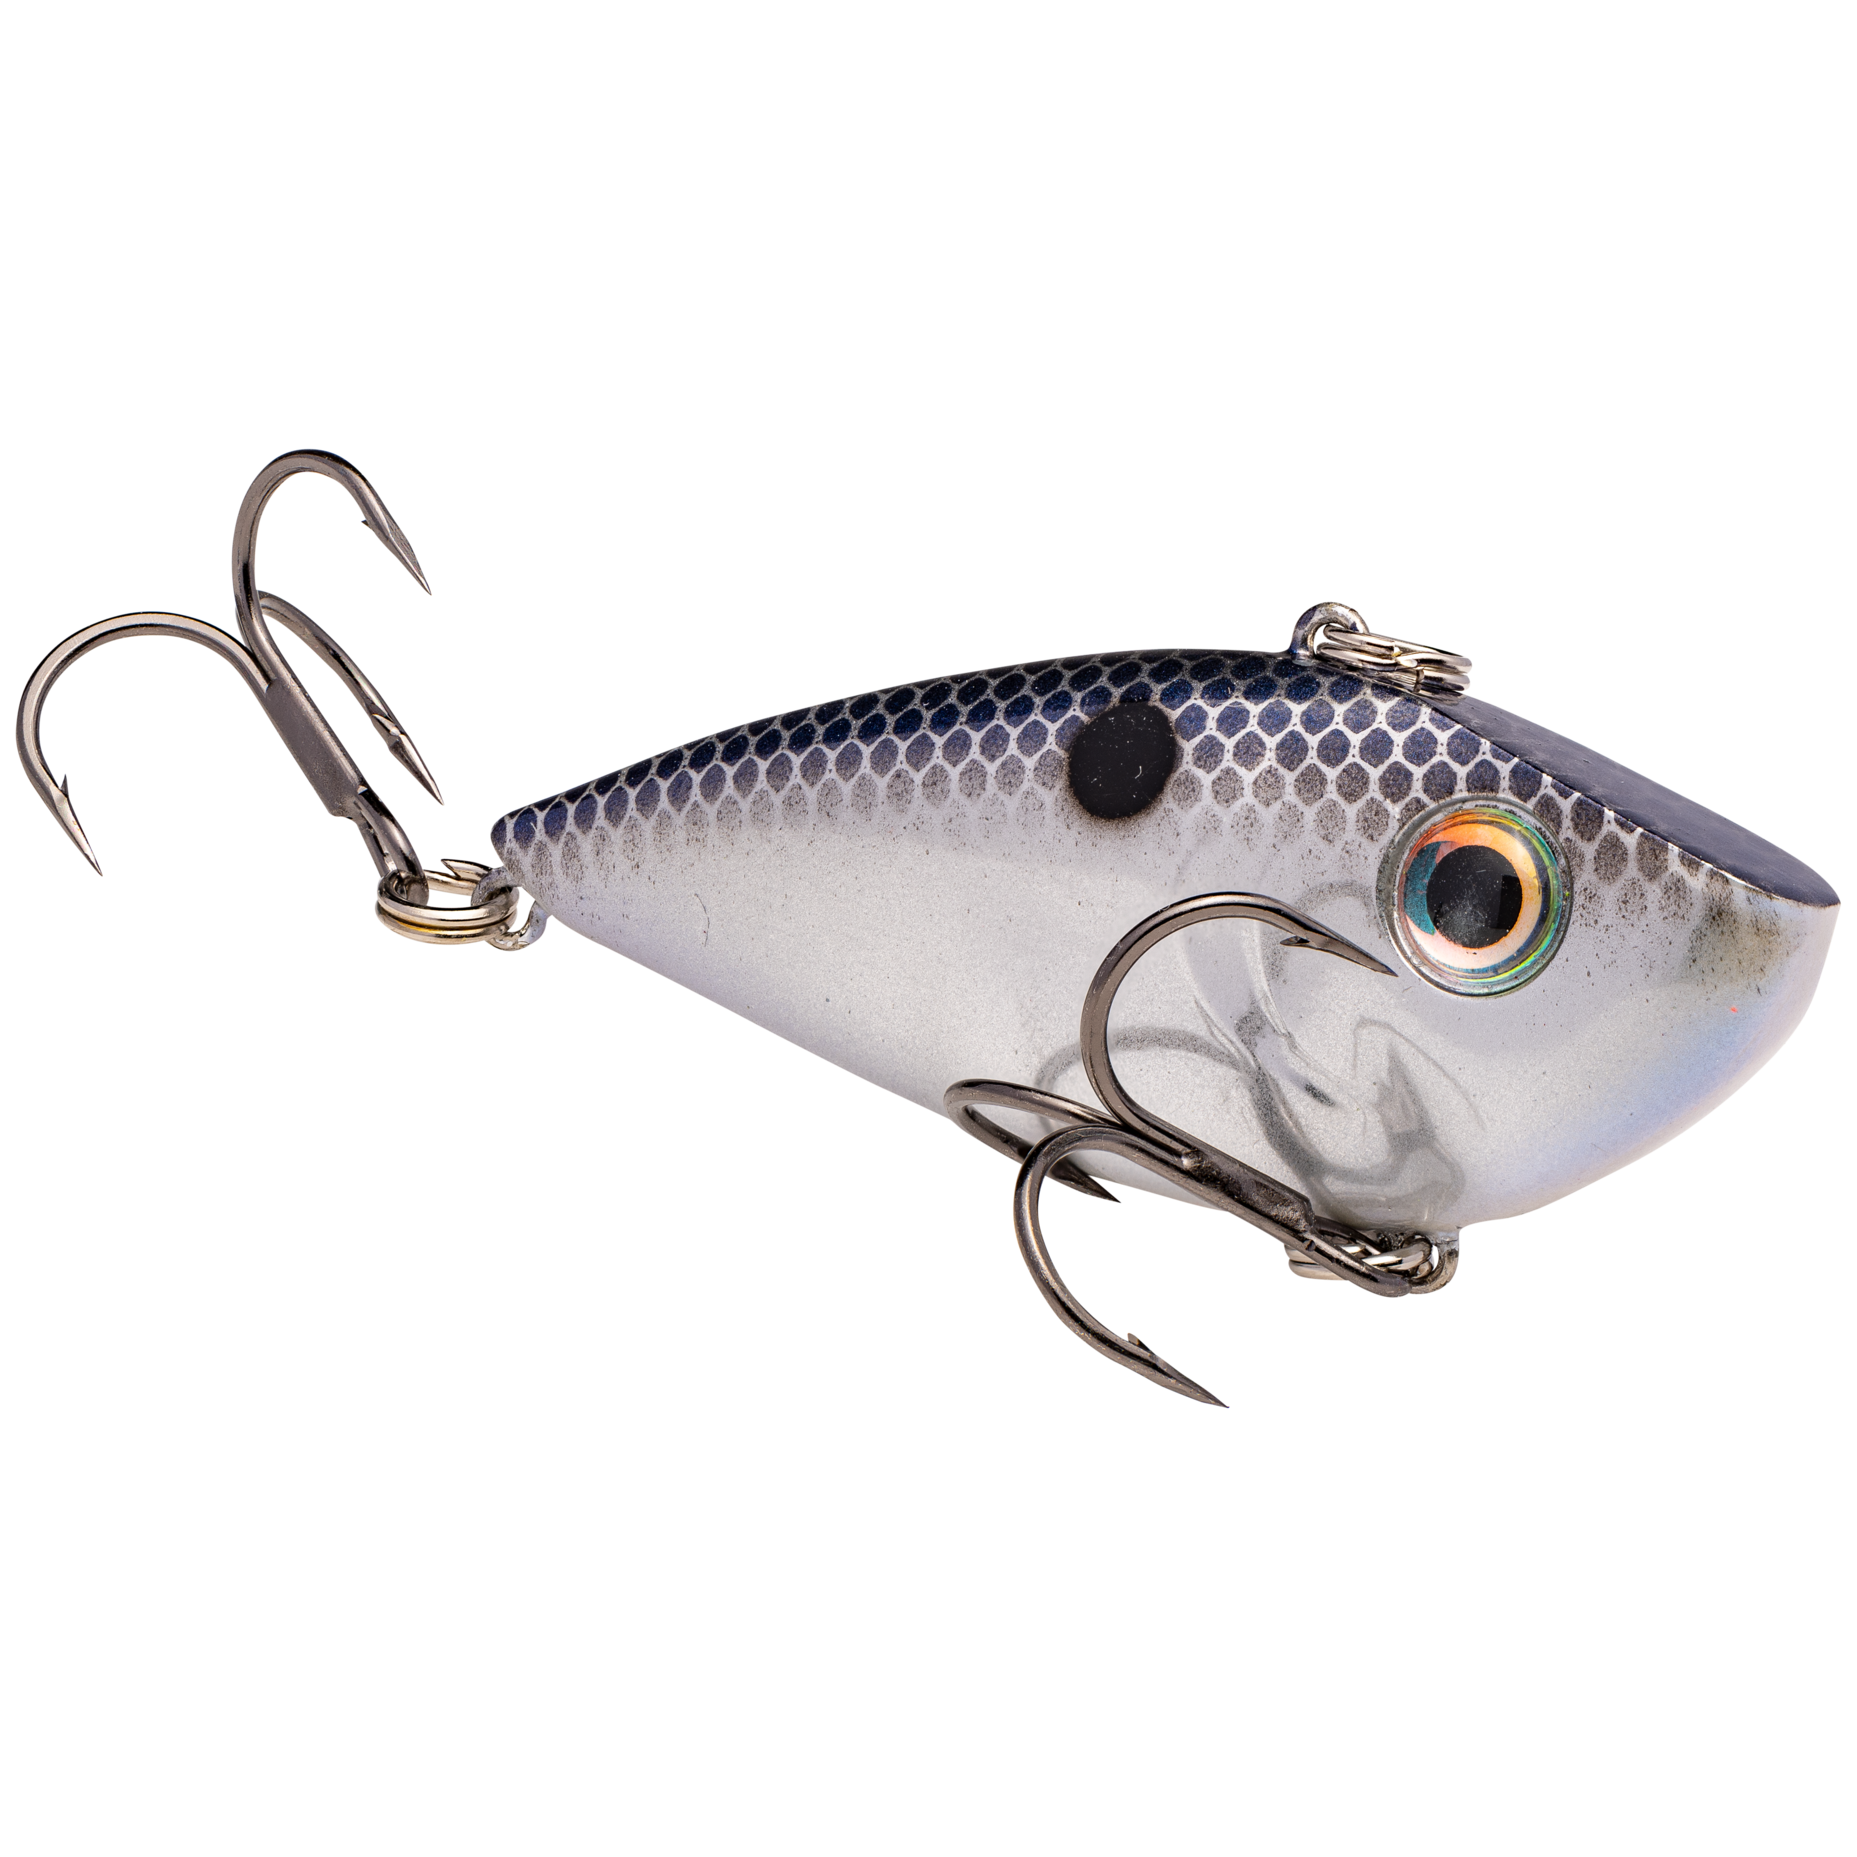 Strike King Red Eyed Special Spinnerbait – Natural Sports - The